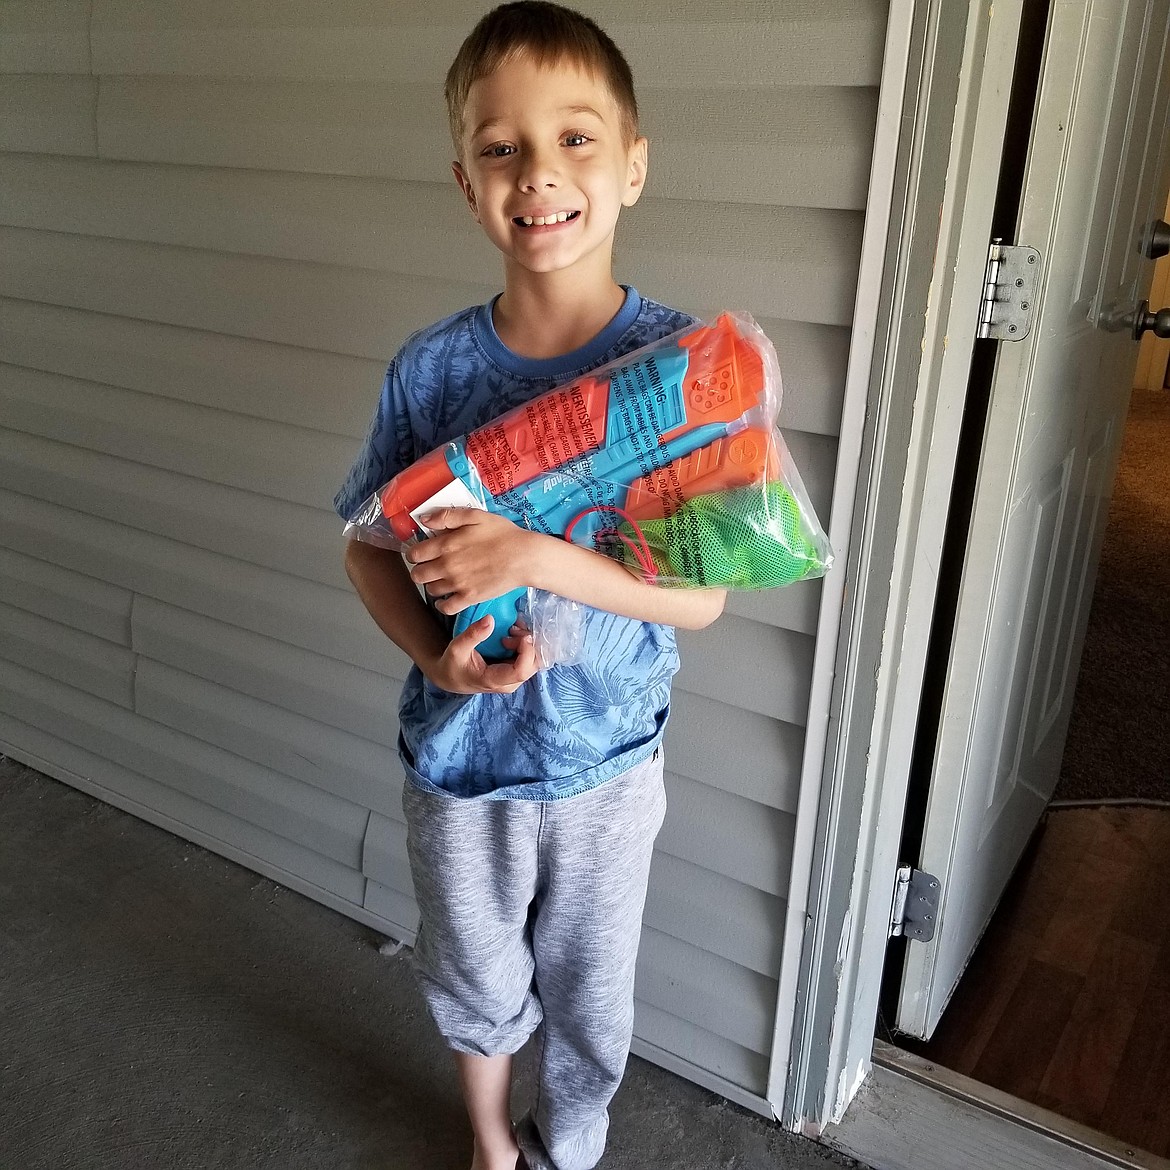 Angelo Adams, who took fifth place in the Grant County Democrats’ Candy Count game, shows off the Super Soaker he won.